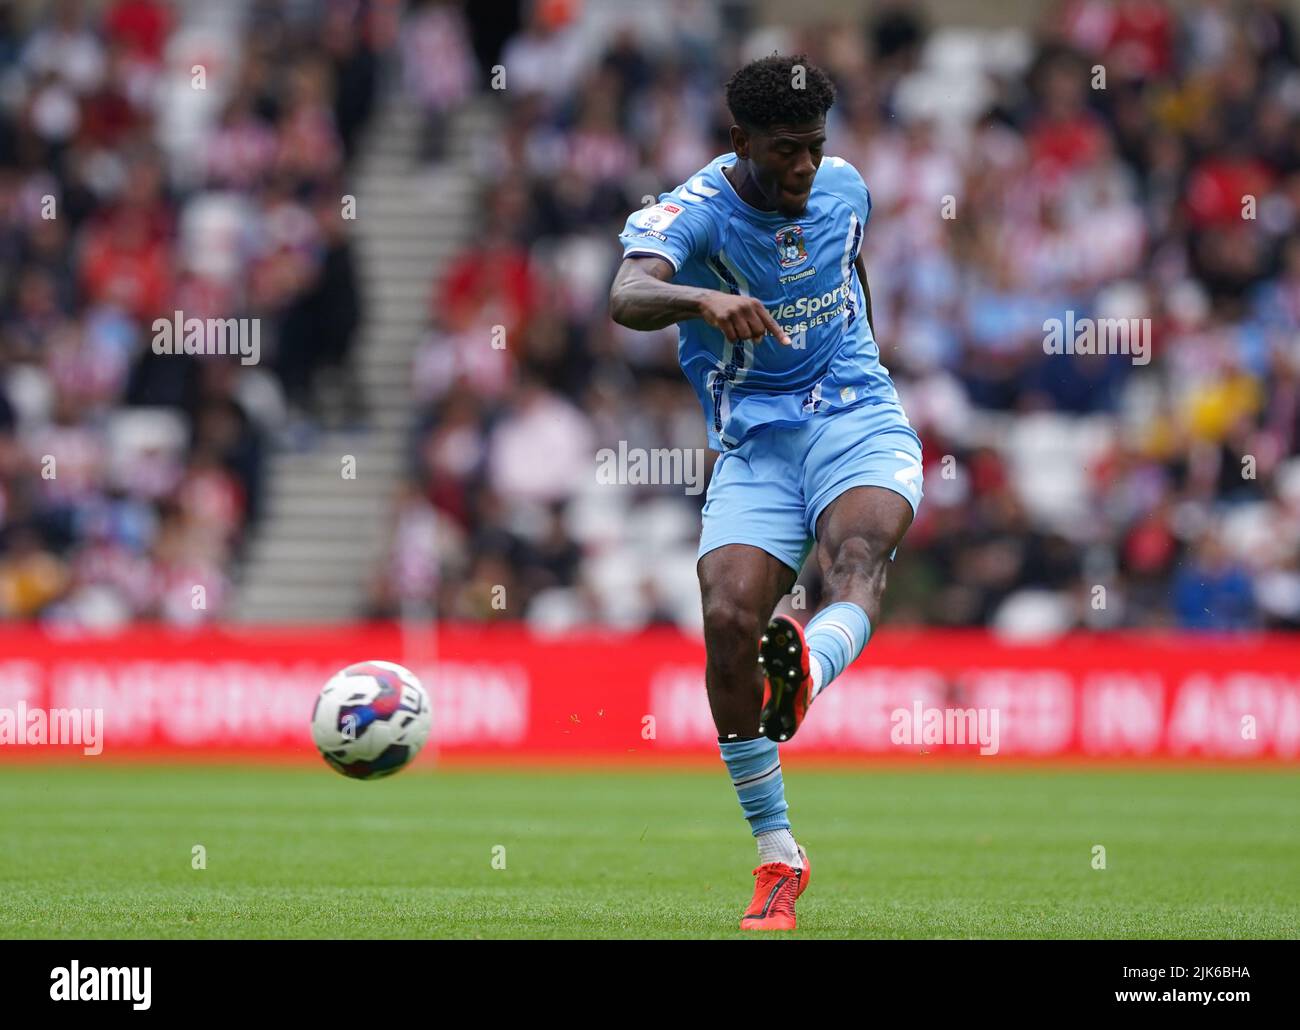 Coventry City's Jonathan Panzo attempts a shot on goal during the Sky Bet Championship match at the Stadium of Light, Sunderland. Picture date: Sunday July 31, 2022. Stock Photo